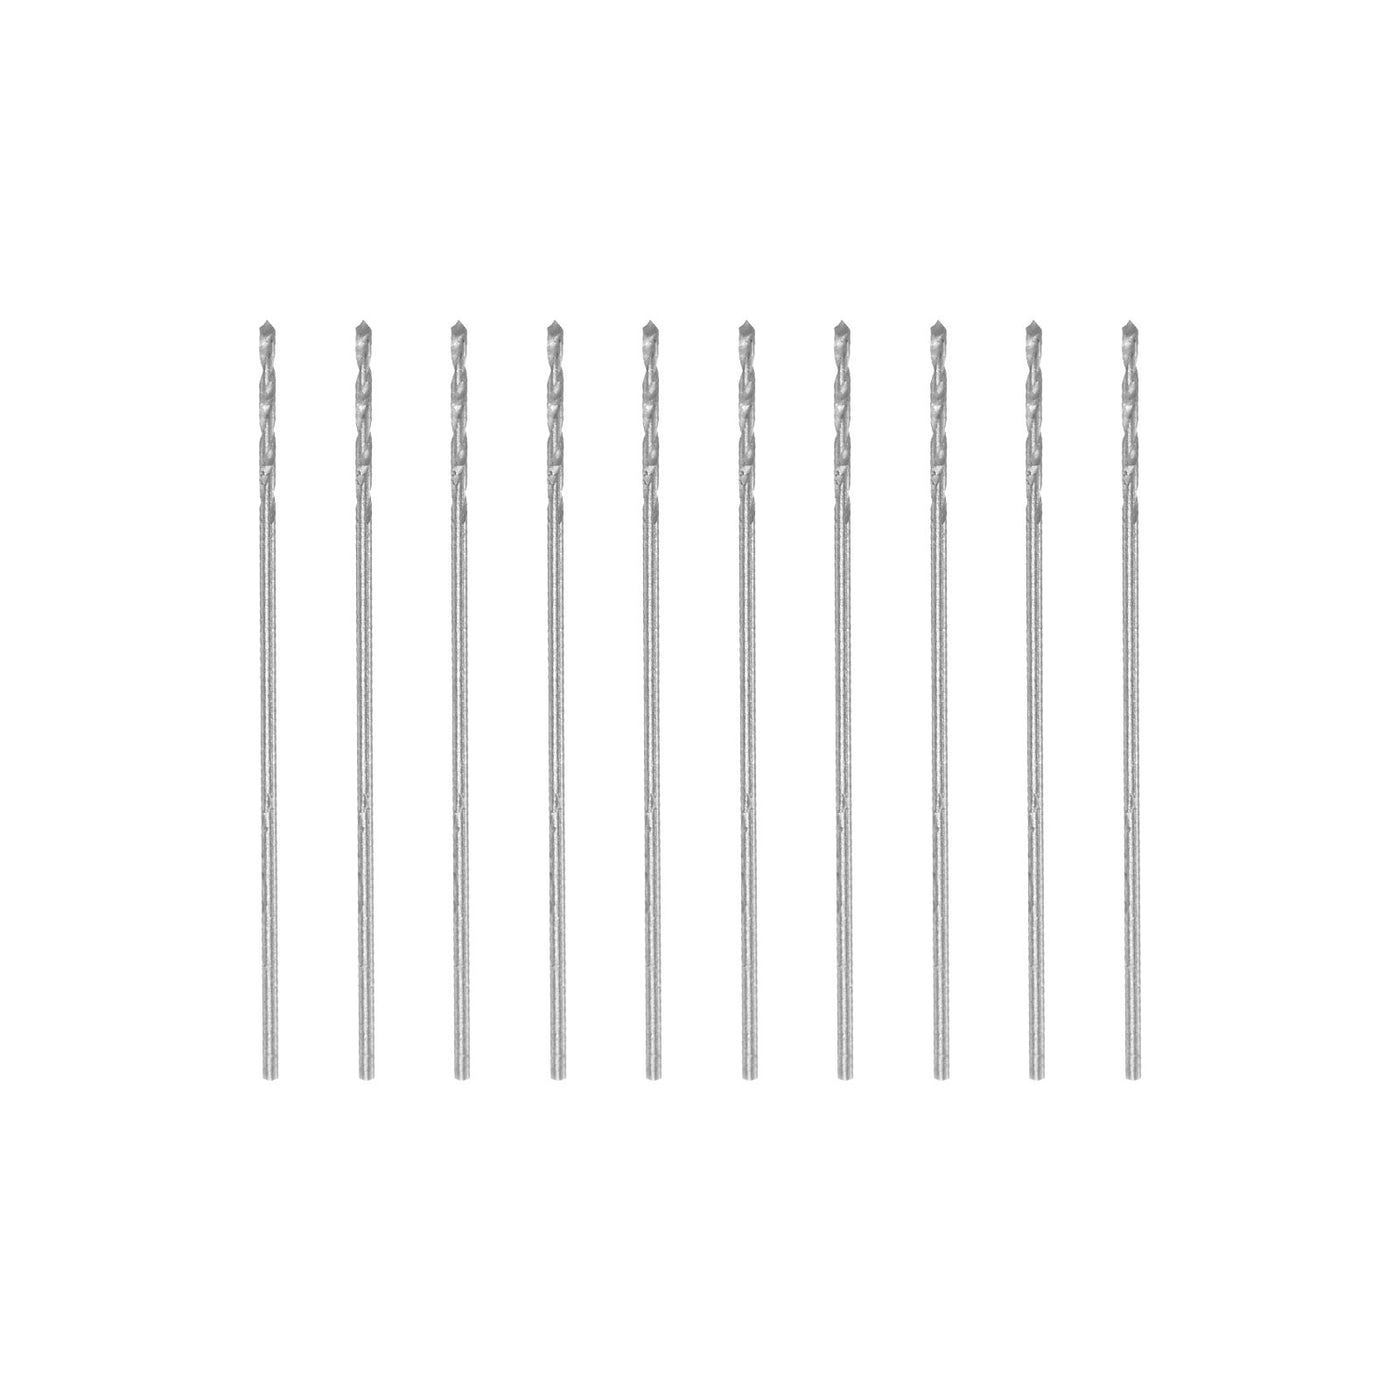 uxcell Uxcell 10 Pcs 0.45mm High Speed Steel Drill Bits, Fully Ground 20mm Length Drill Bit